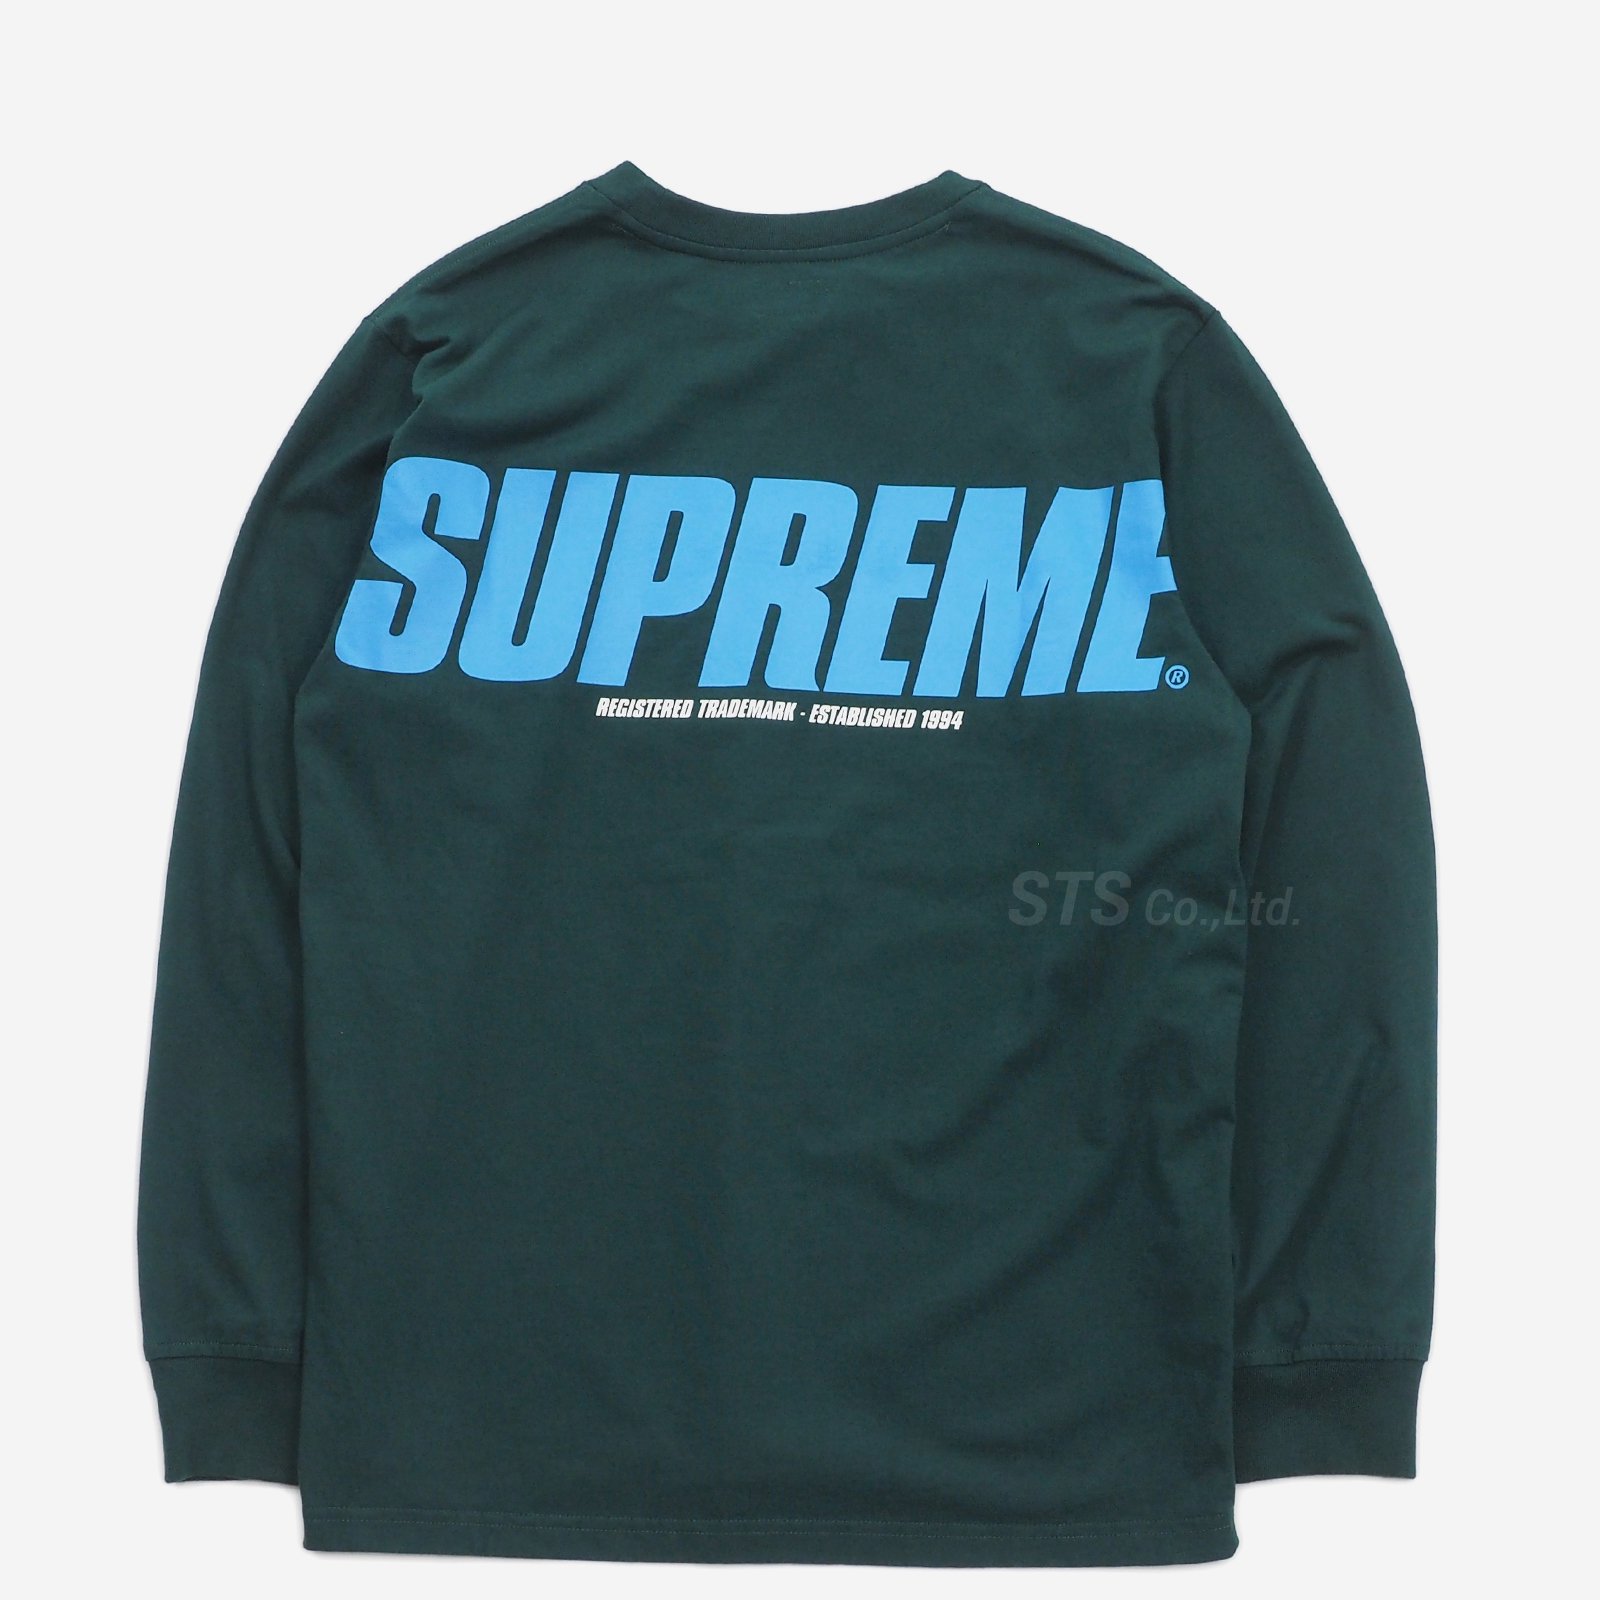 SUPREME Trademark L/S Top 19AW バックロゴ 白 - Tシャツ/カットソー